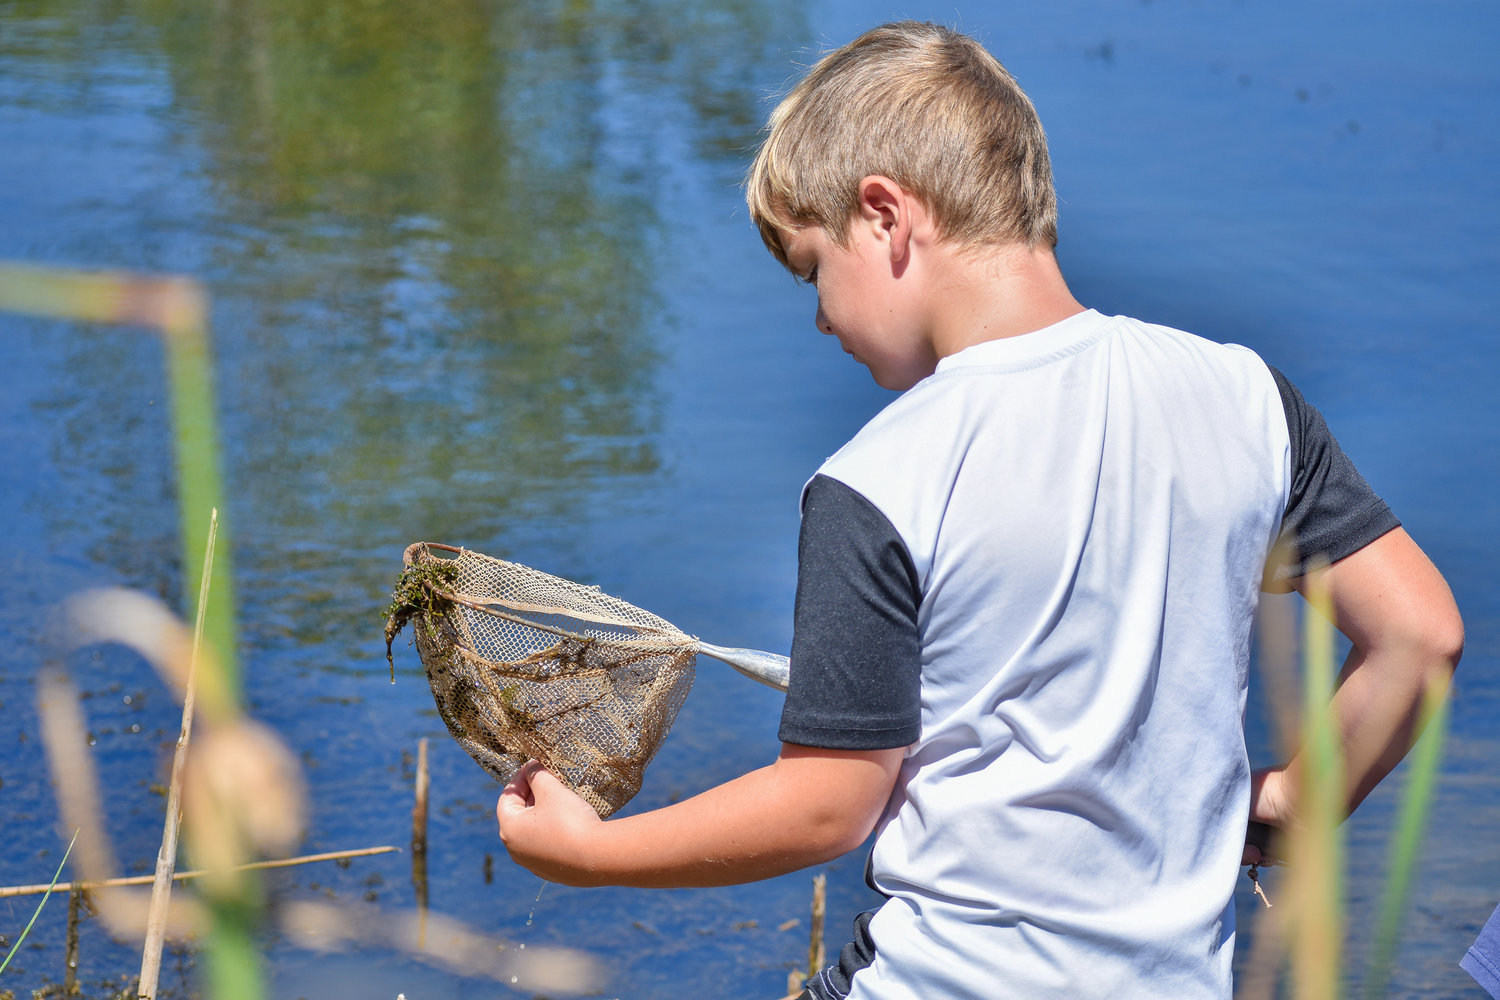 Paxton Sullivan, 7, checks his net for any interesting finds.